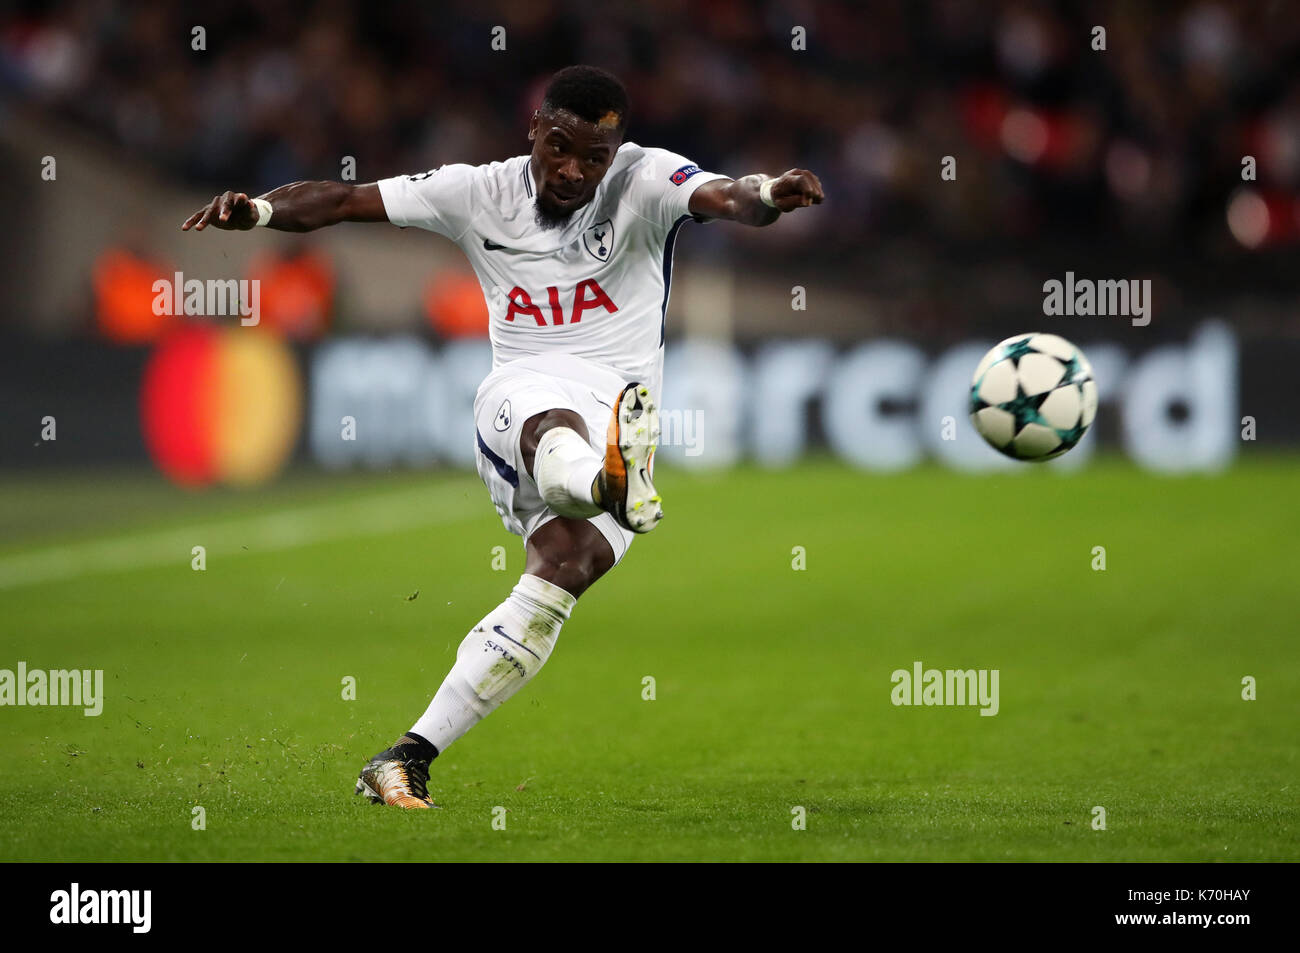 Tottenham Hotspur's Serge Aurier during the UEFA Champions League, Group H match at Wembley, London. Stock Photo